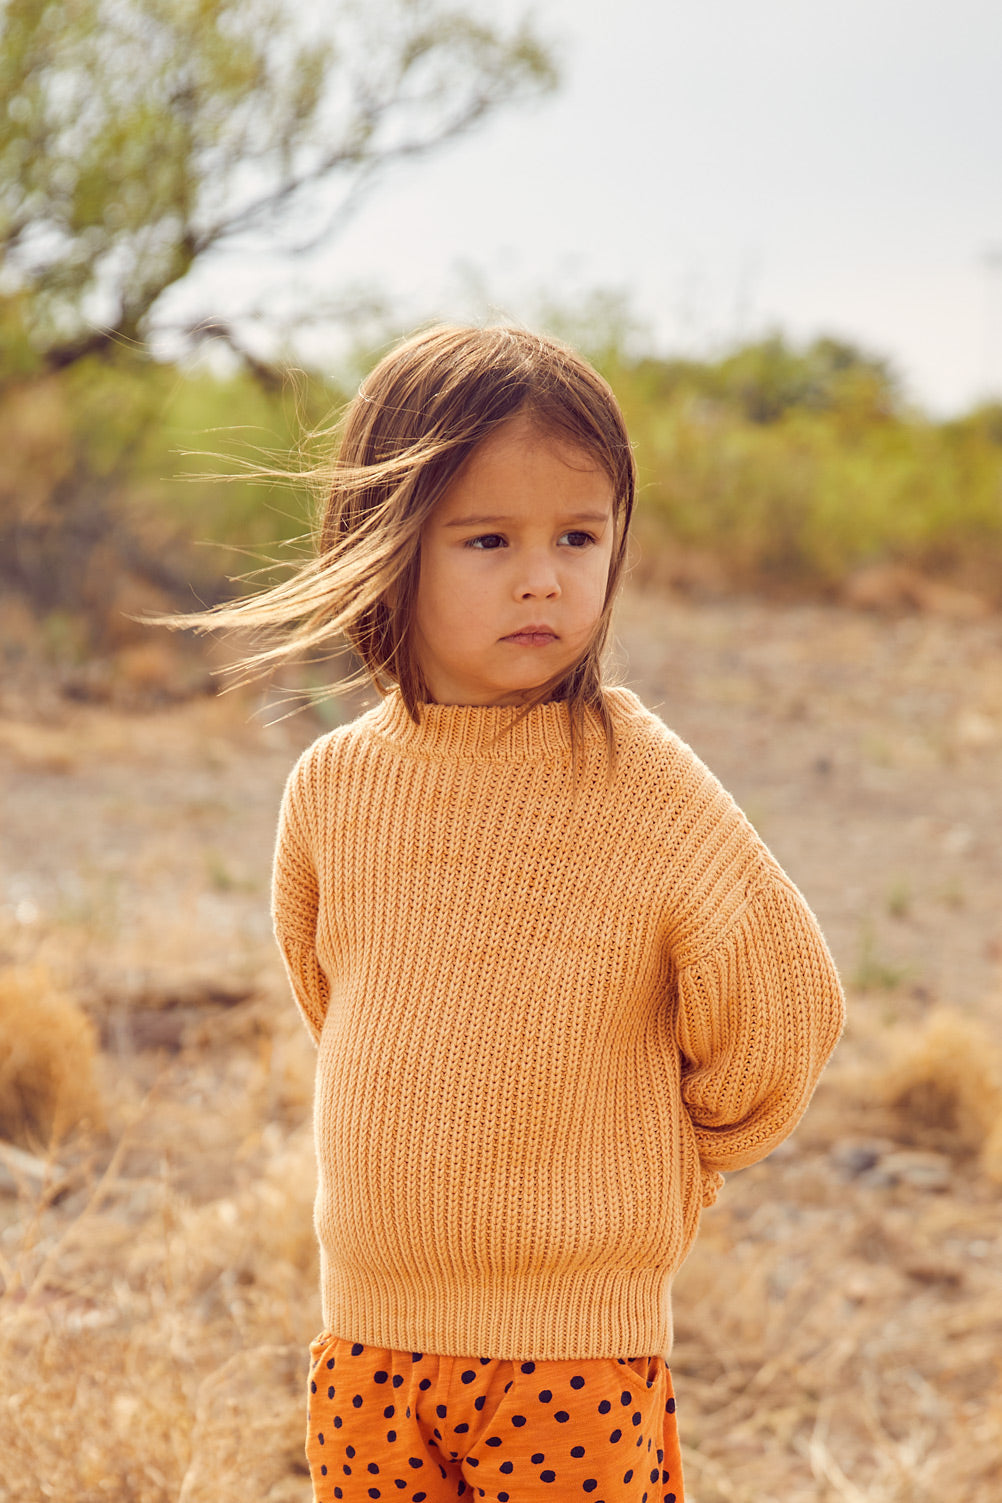 Fisherman Crew Neck Sweater - Desert Sand+Model is 39 inches tall, 33lbs and wearing size 3-4y